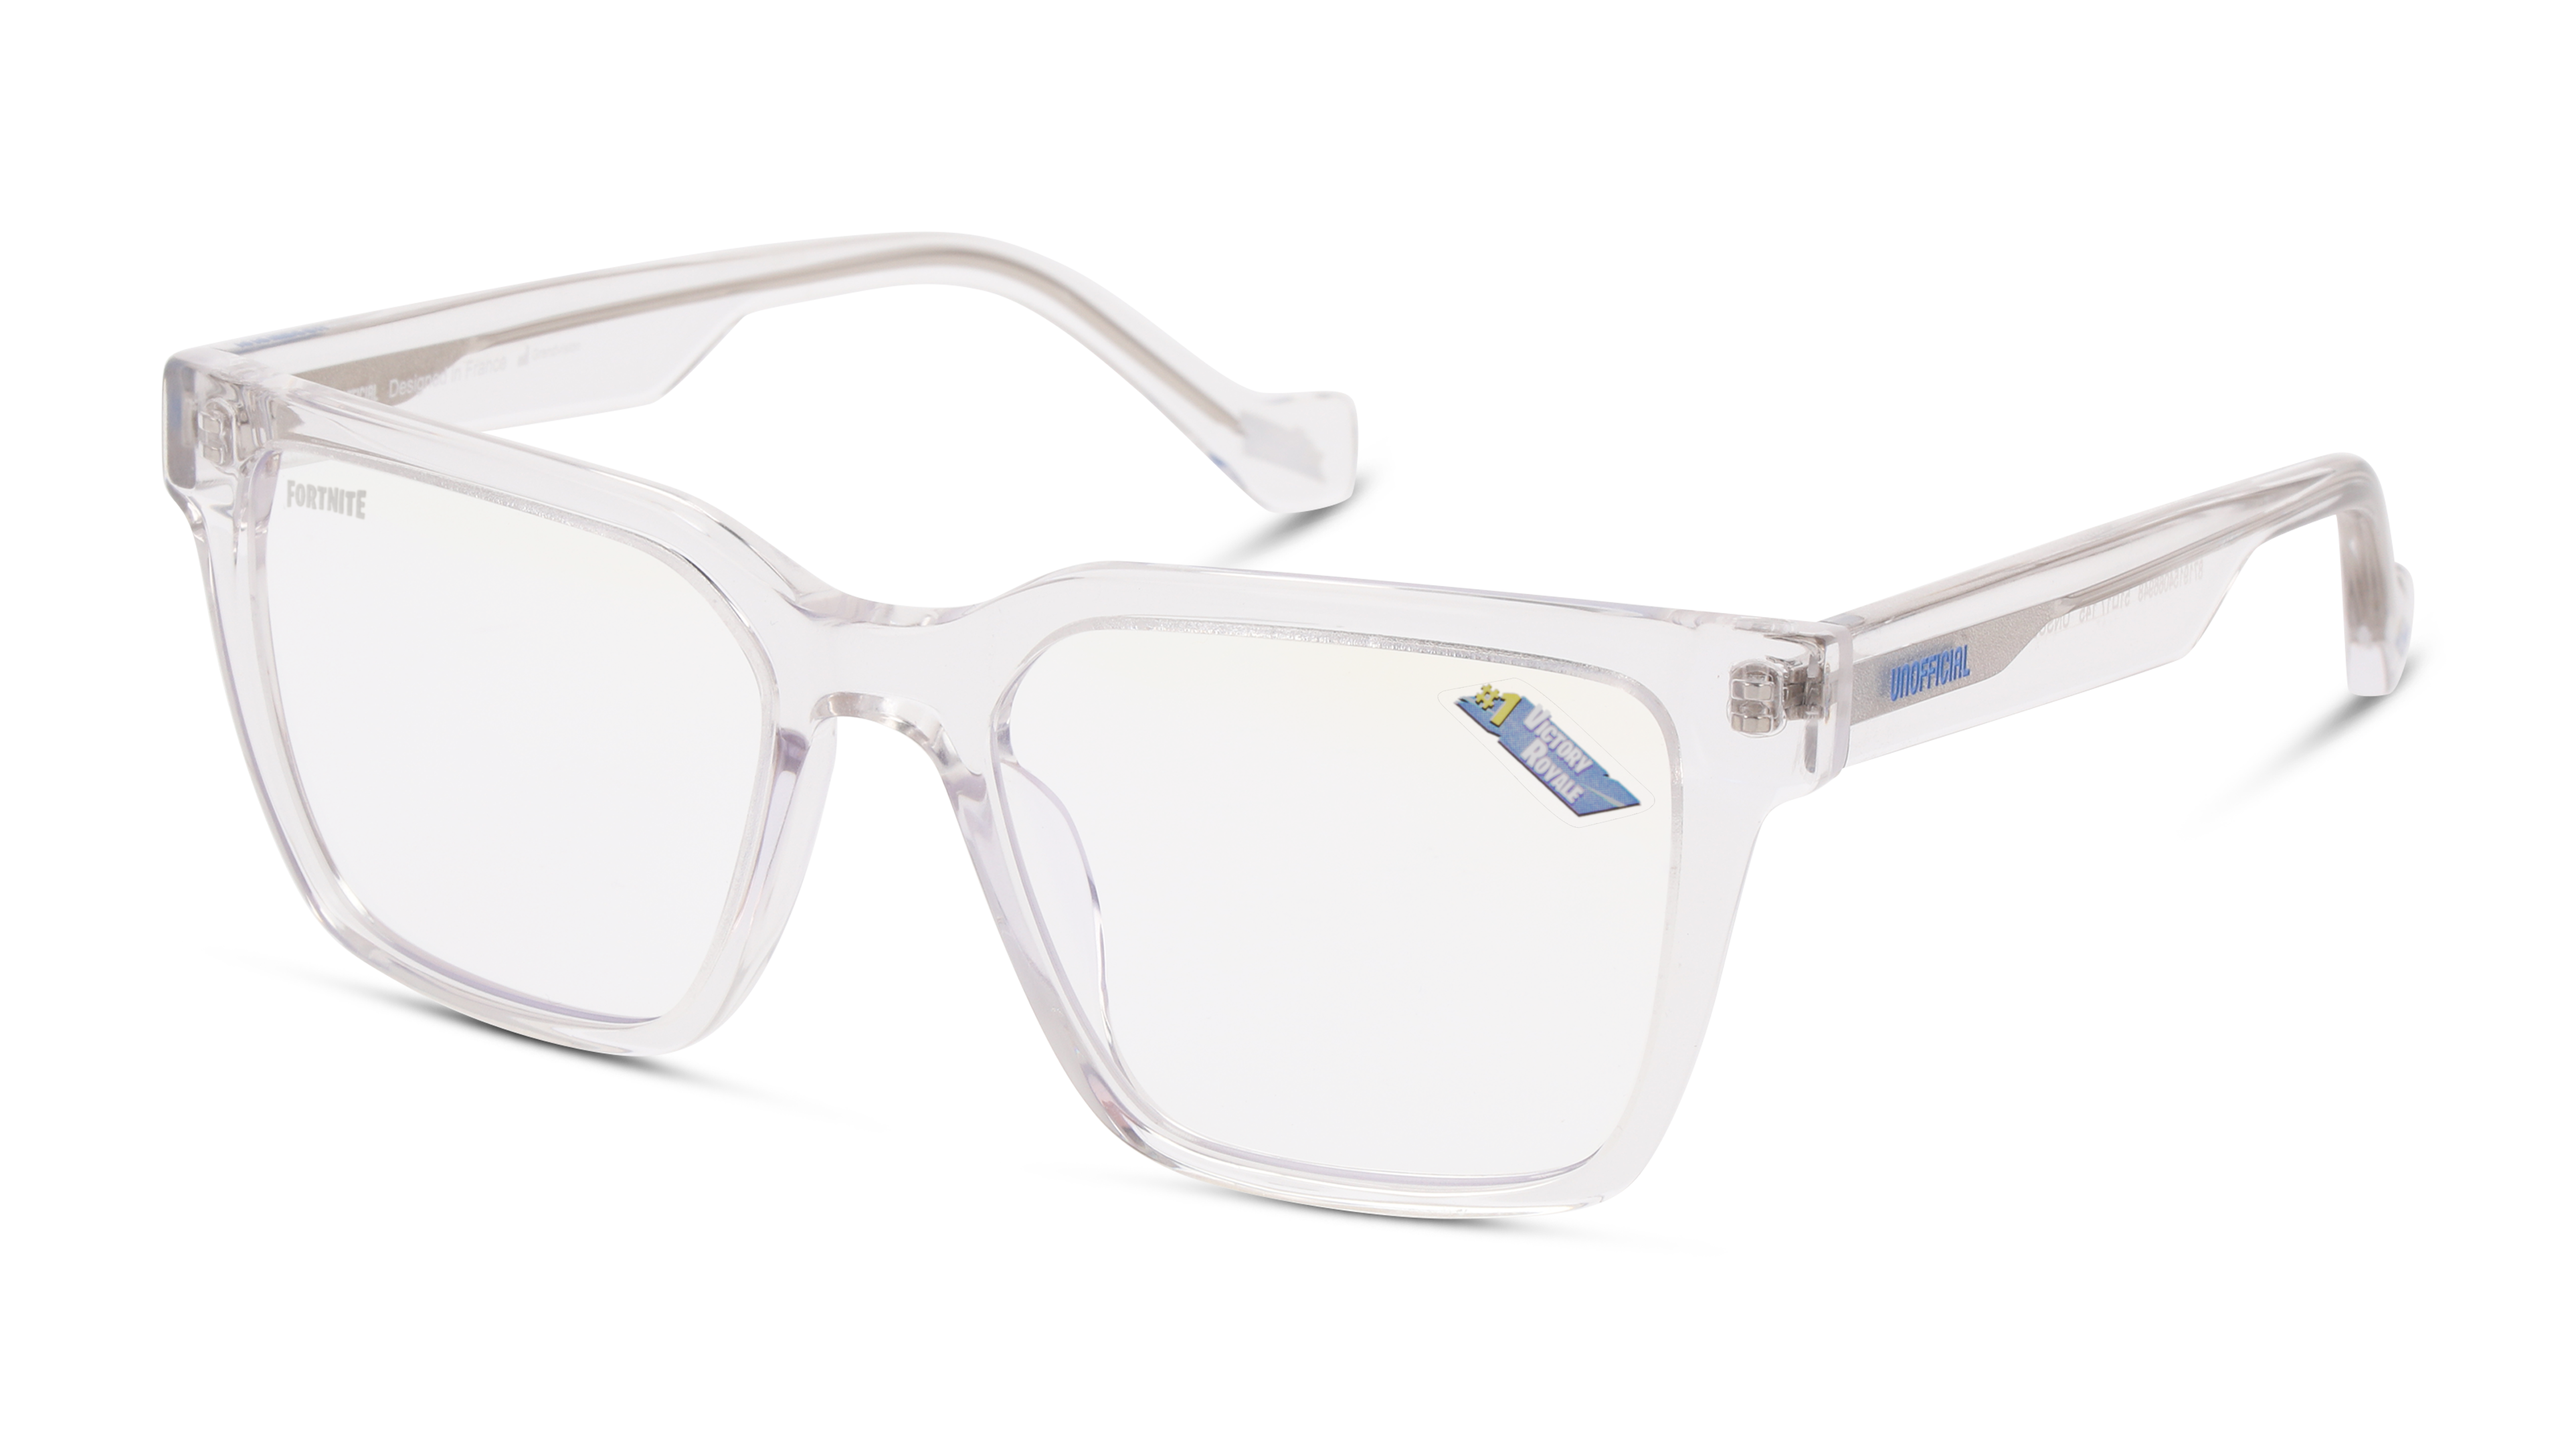 Angle_Left01 Unofficial UNSU0128 Sunglasses Clear / Transparent, Clear